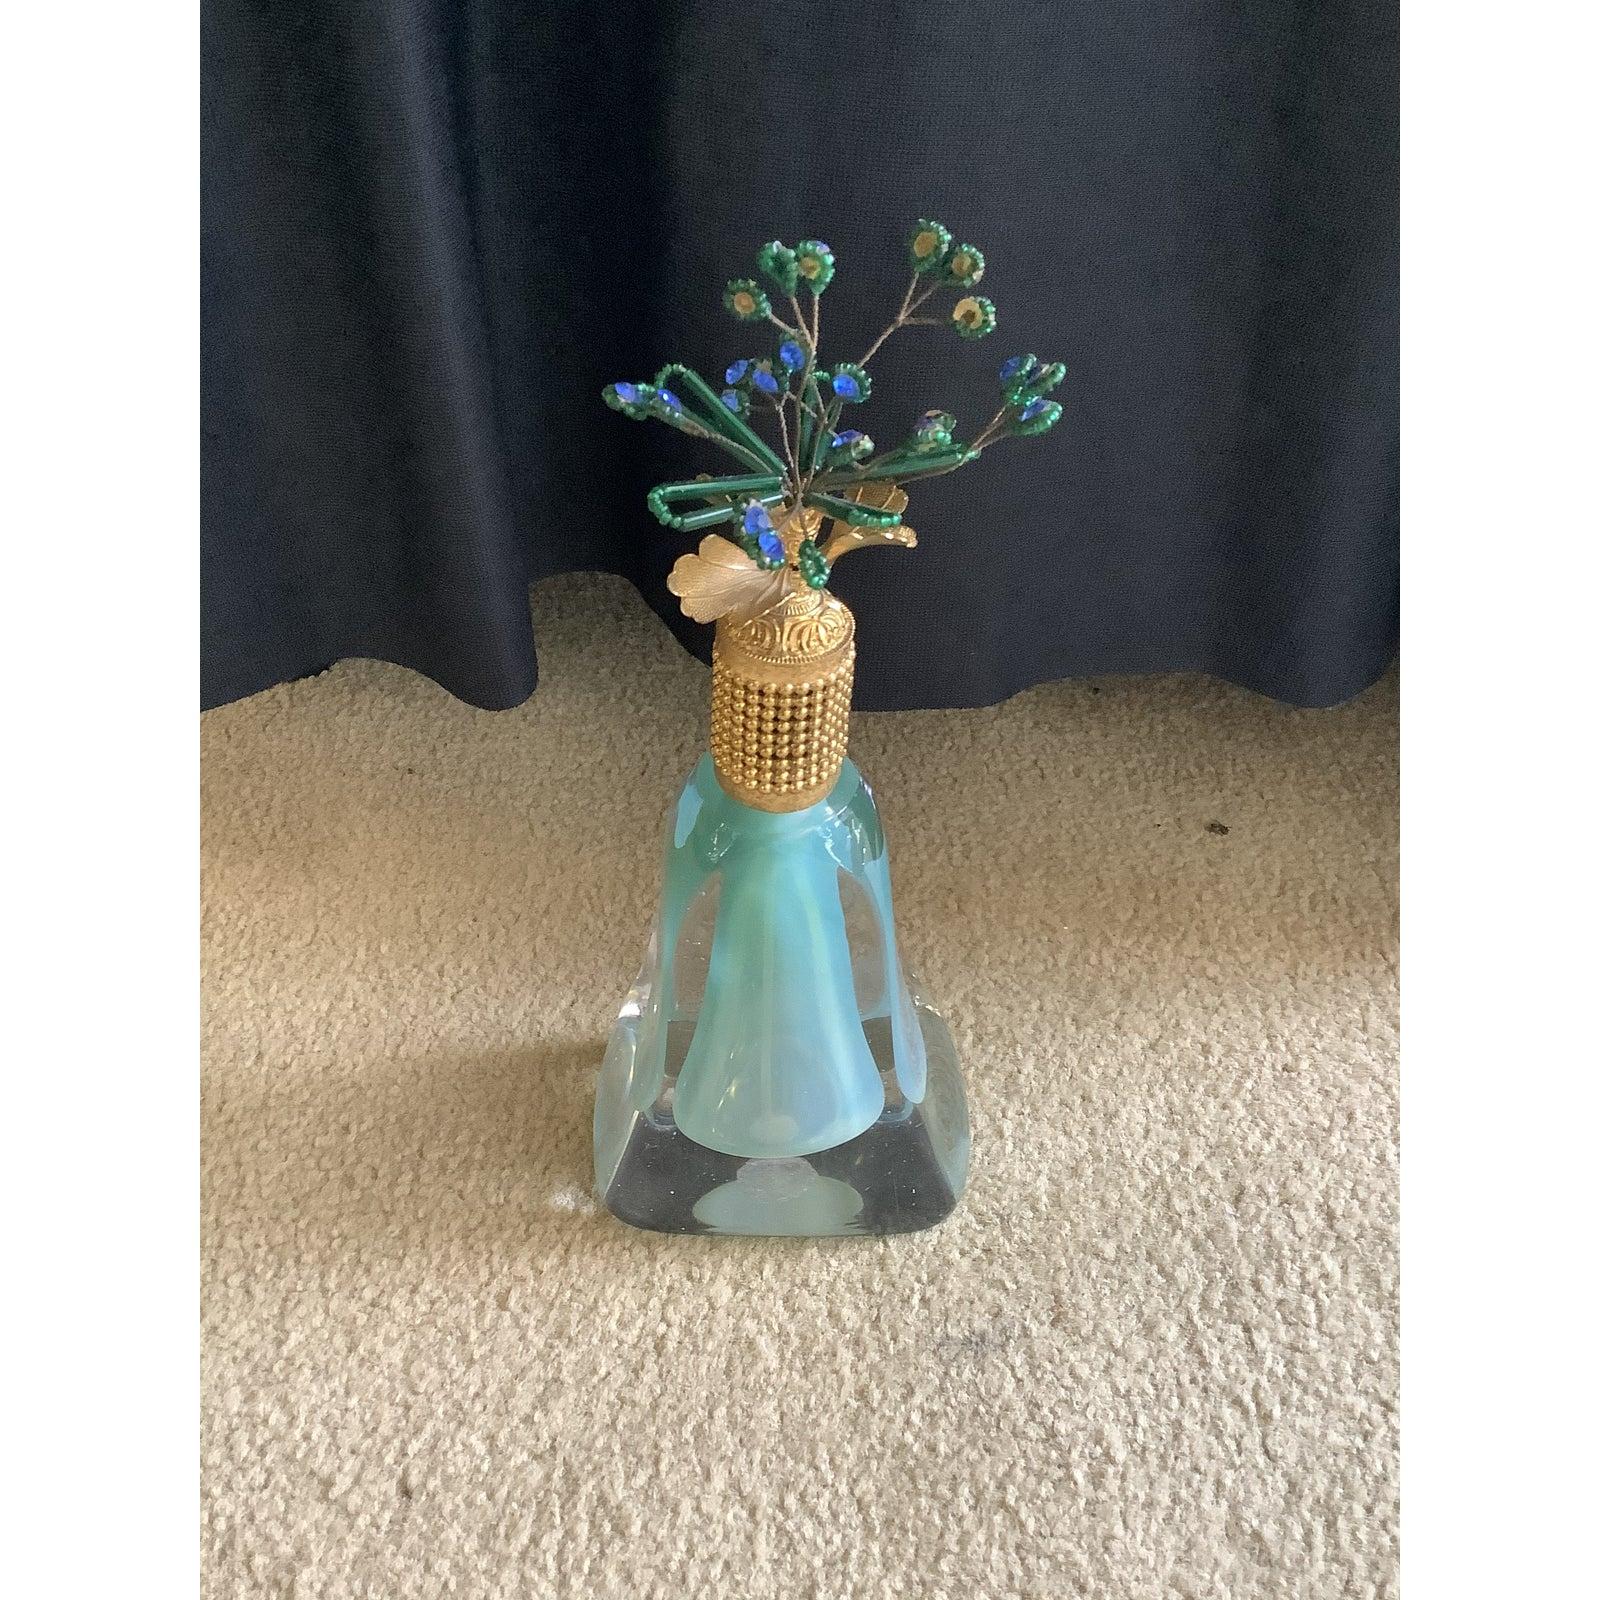 Murano glass perfume bottle with custom top by Irice. The bottle is clear with the inside being a beautiful aqua green. The atomizer is in working condition with a long plastic tube. The top has a very intricate brass fitting with leaves around it